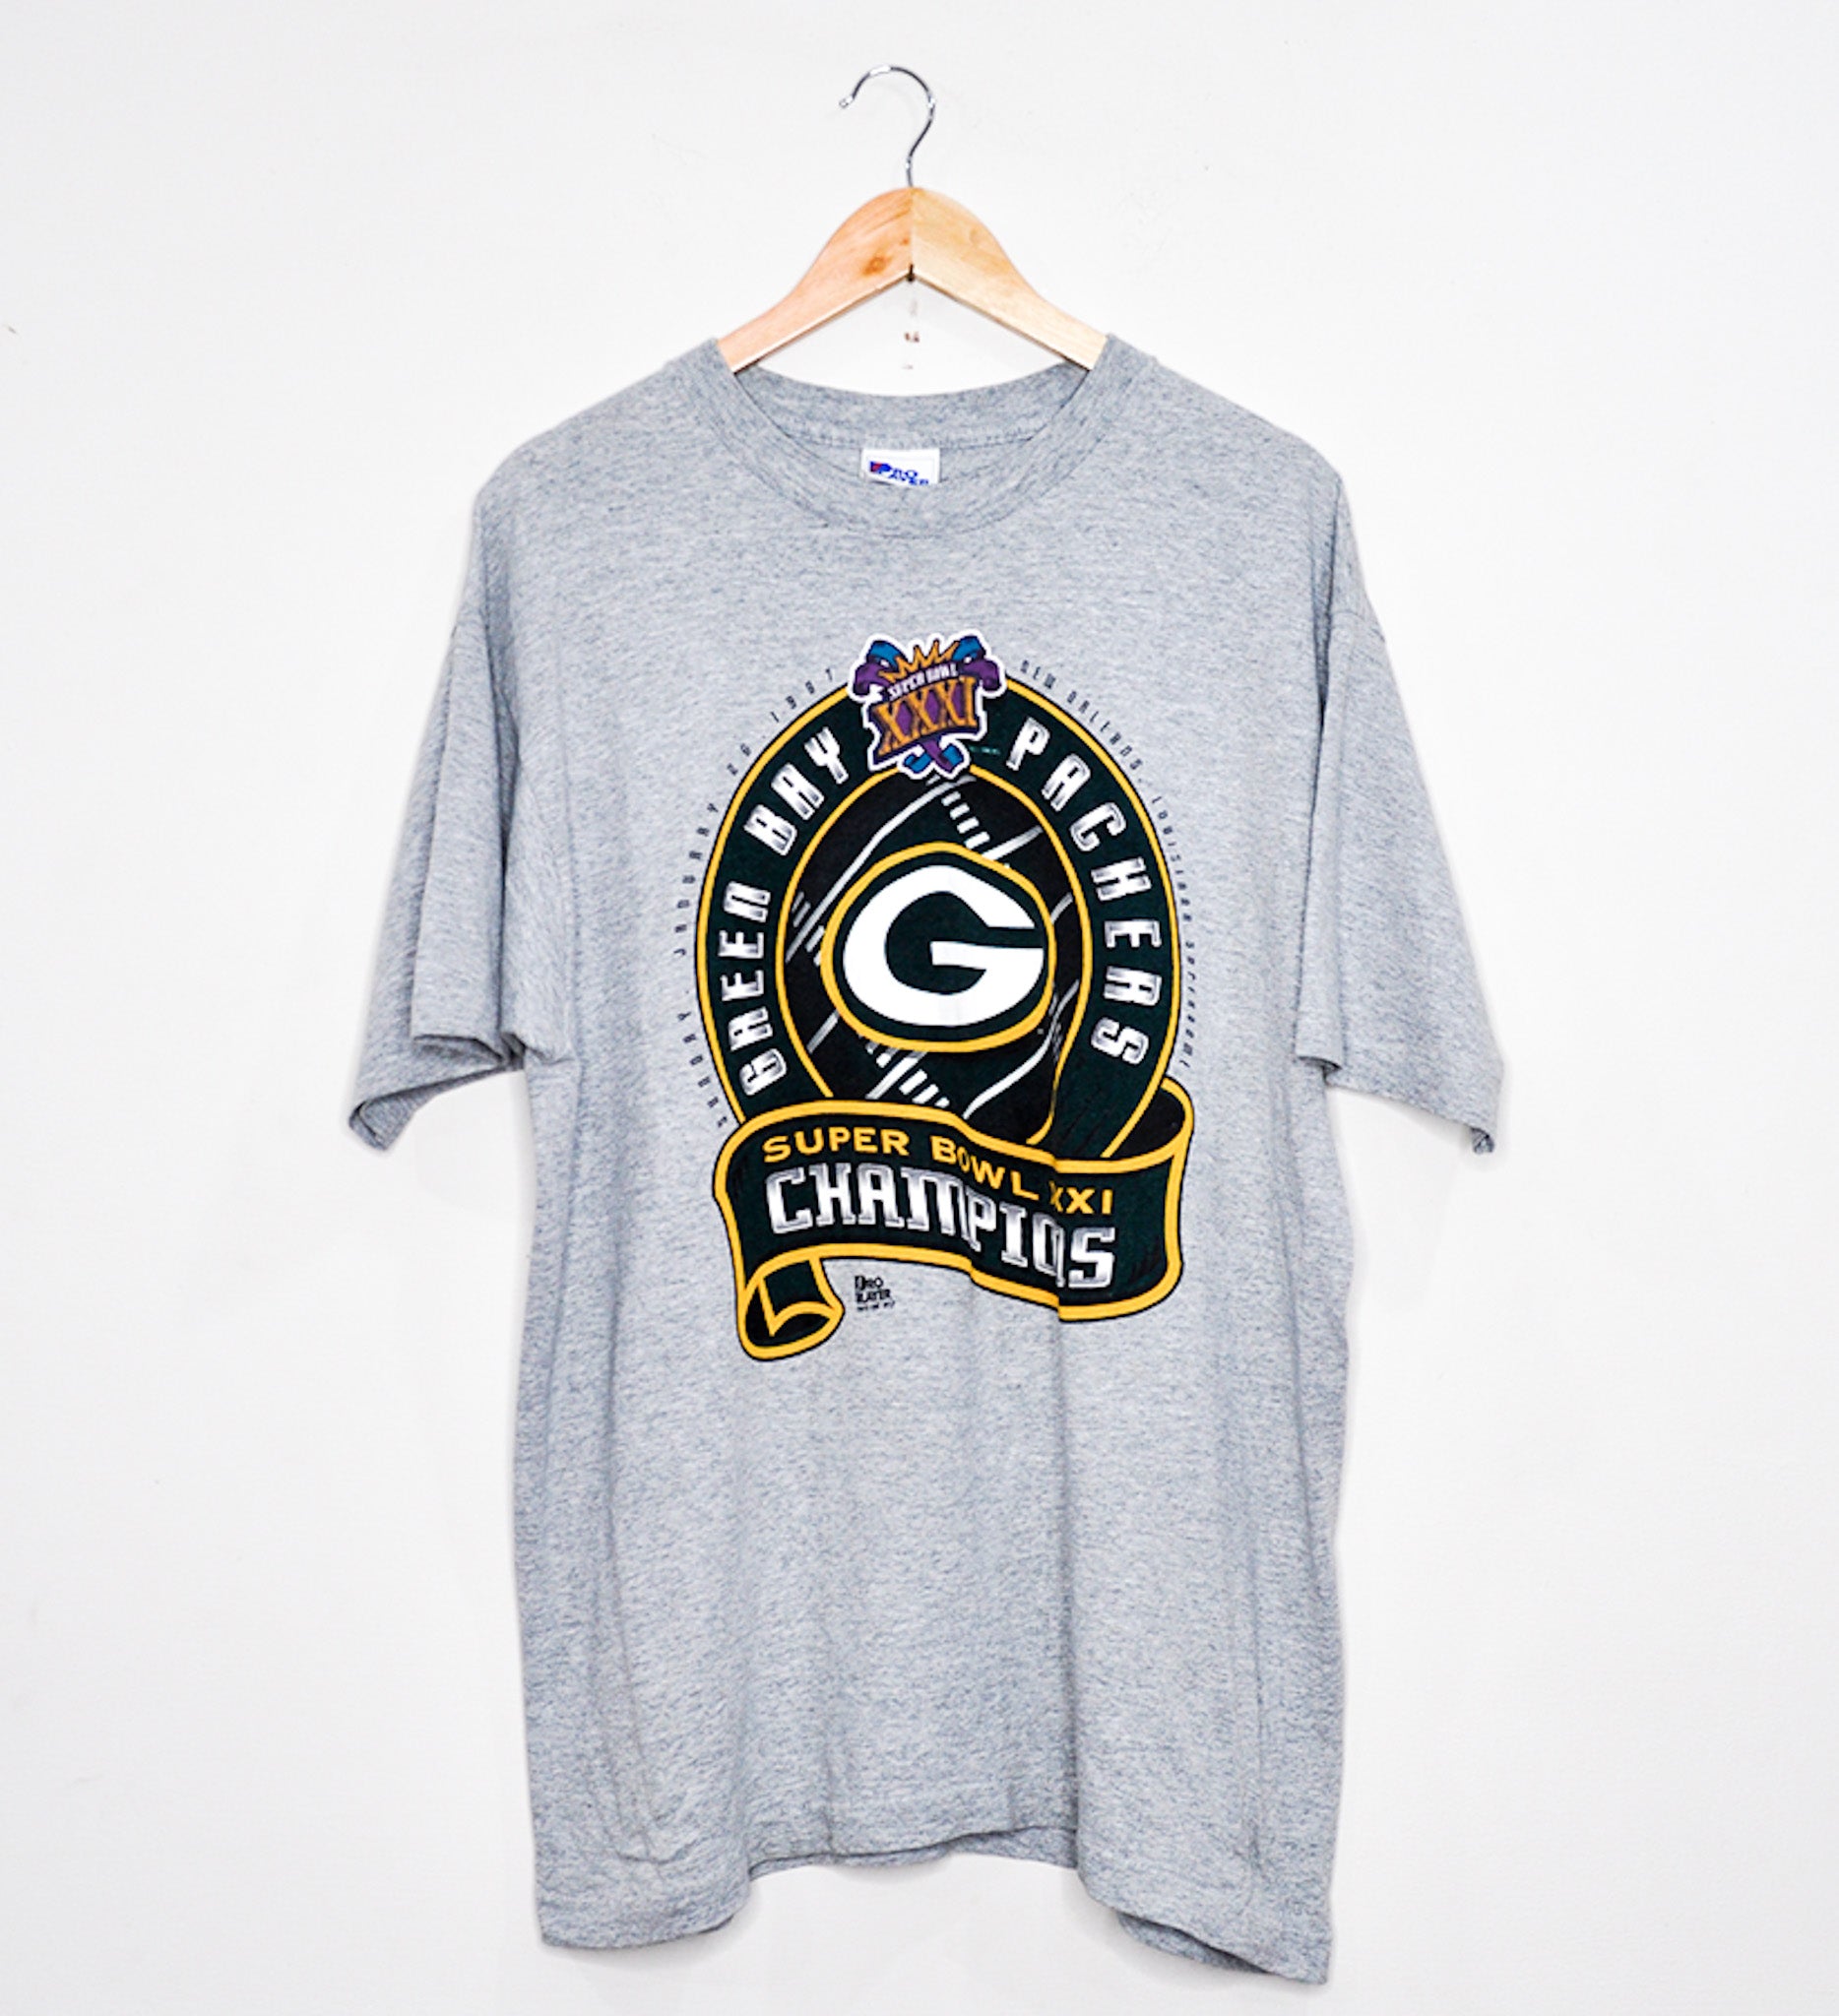 GREEN BAY PACKERS "Super Bowl XXXI Champions" TEE